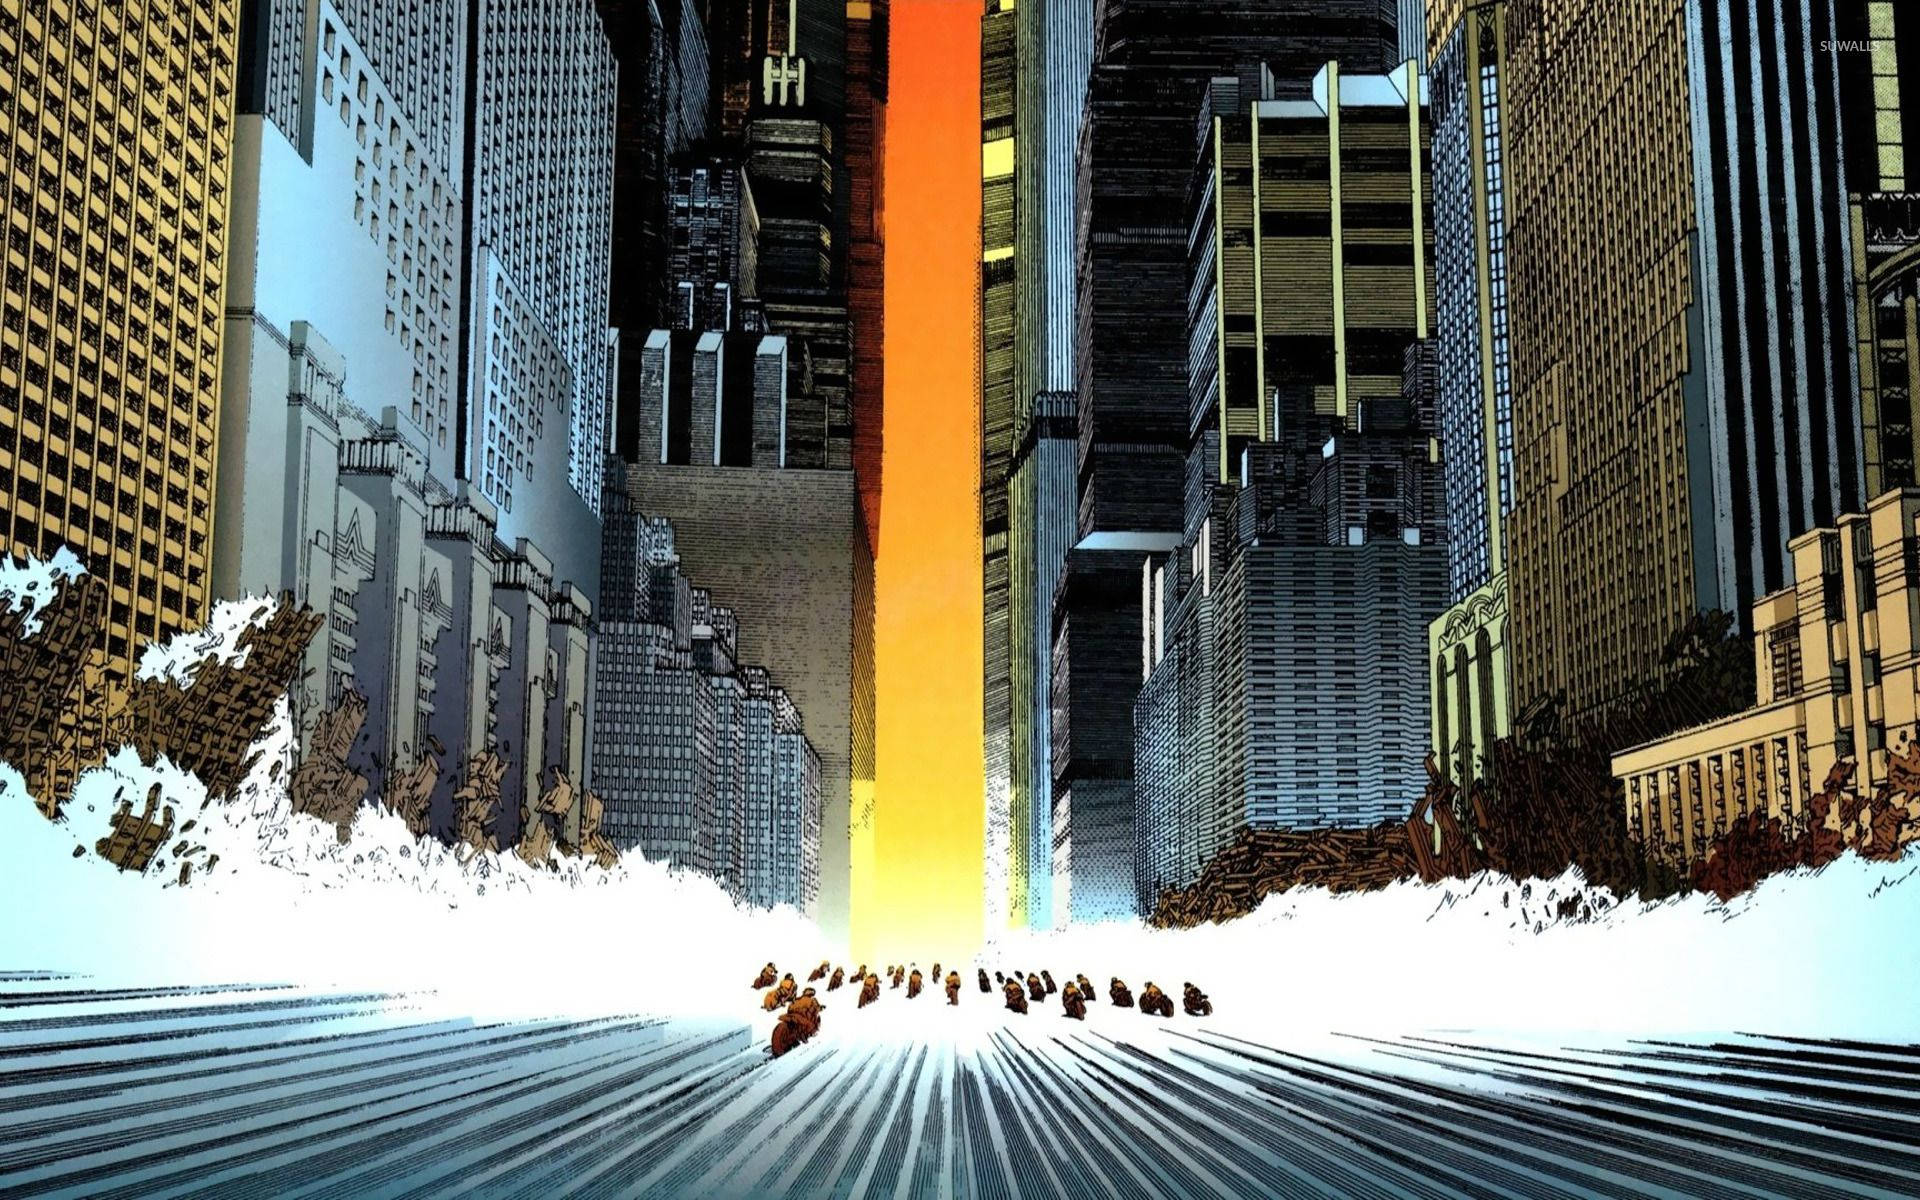 Night falls on the fusion of past and present, Akira's Neo-Tokyo Wallpaper